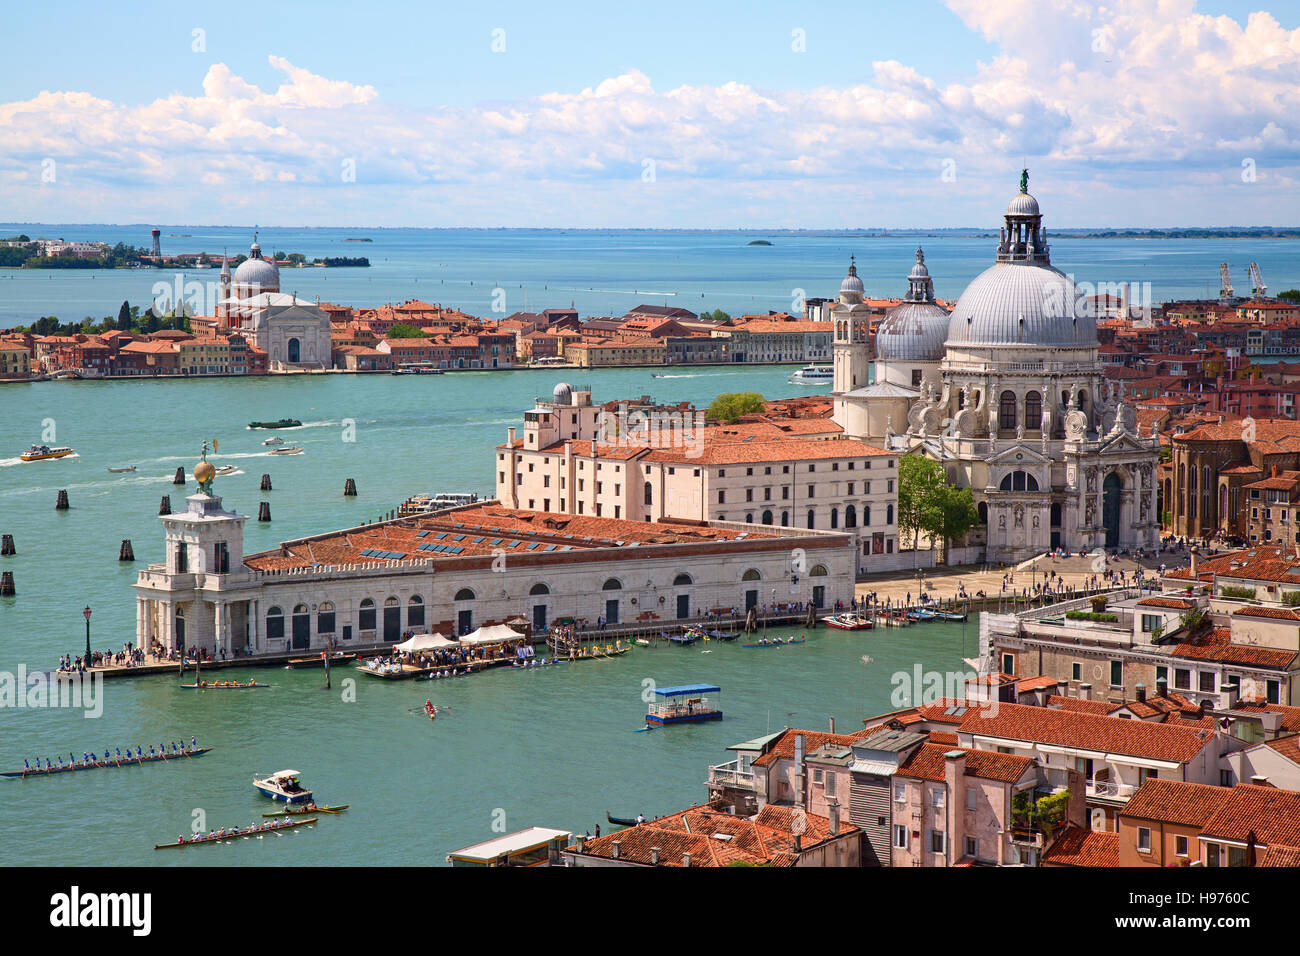 Aerial view of the Venice city, Italy Stock Photo